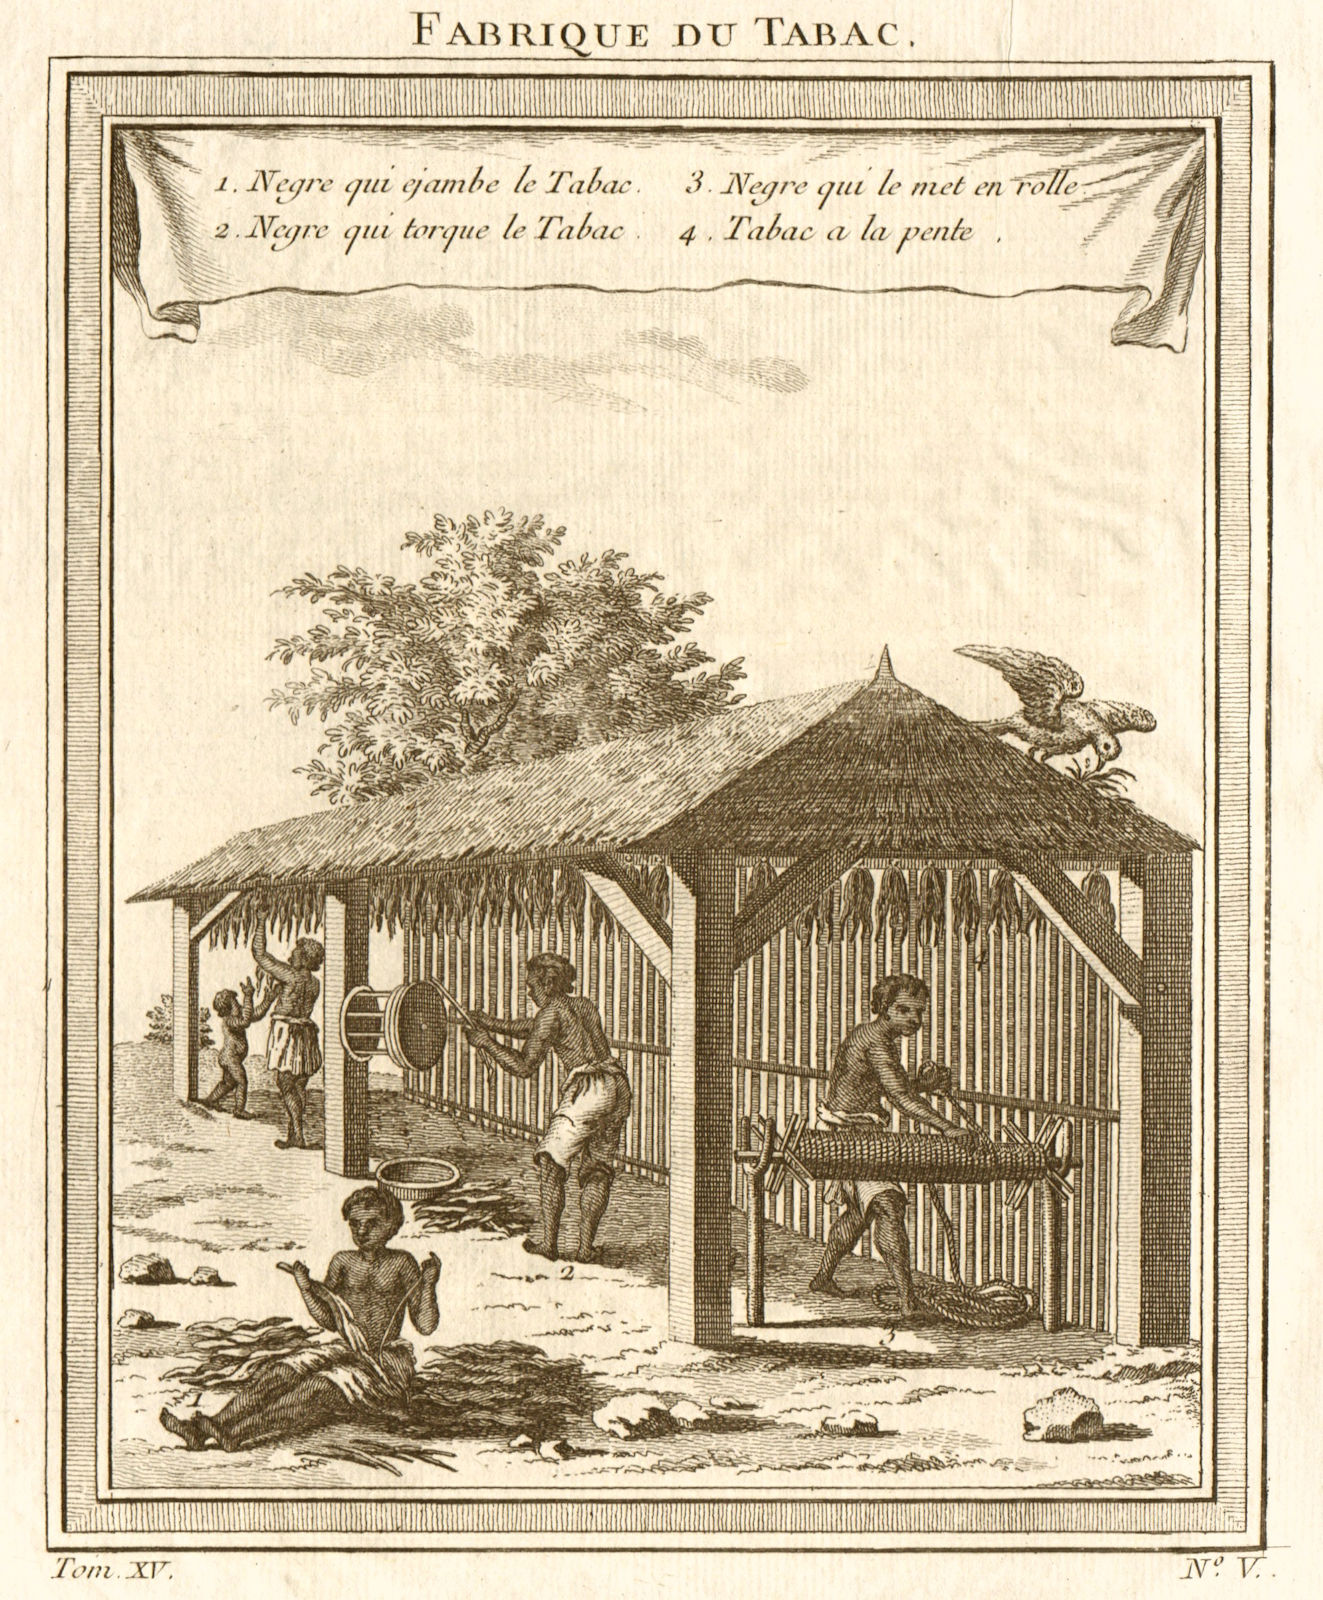 'Fabrique du Tabac'. Tobacco curing factory. Caribbean West Indies. Priming 1759